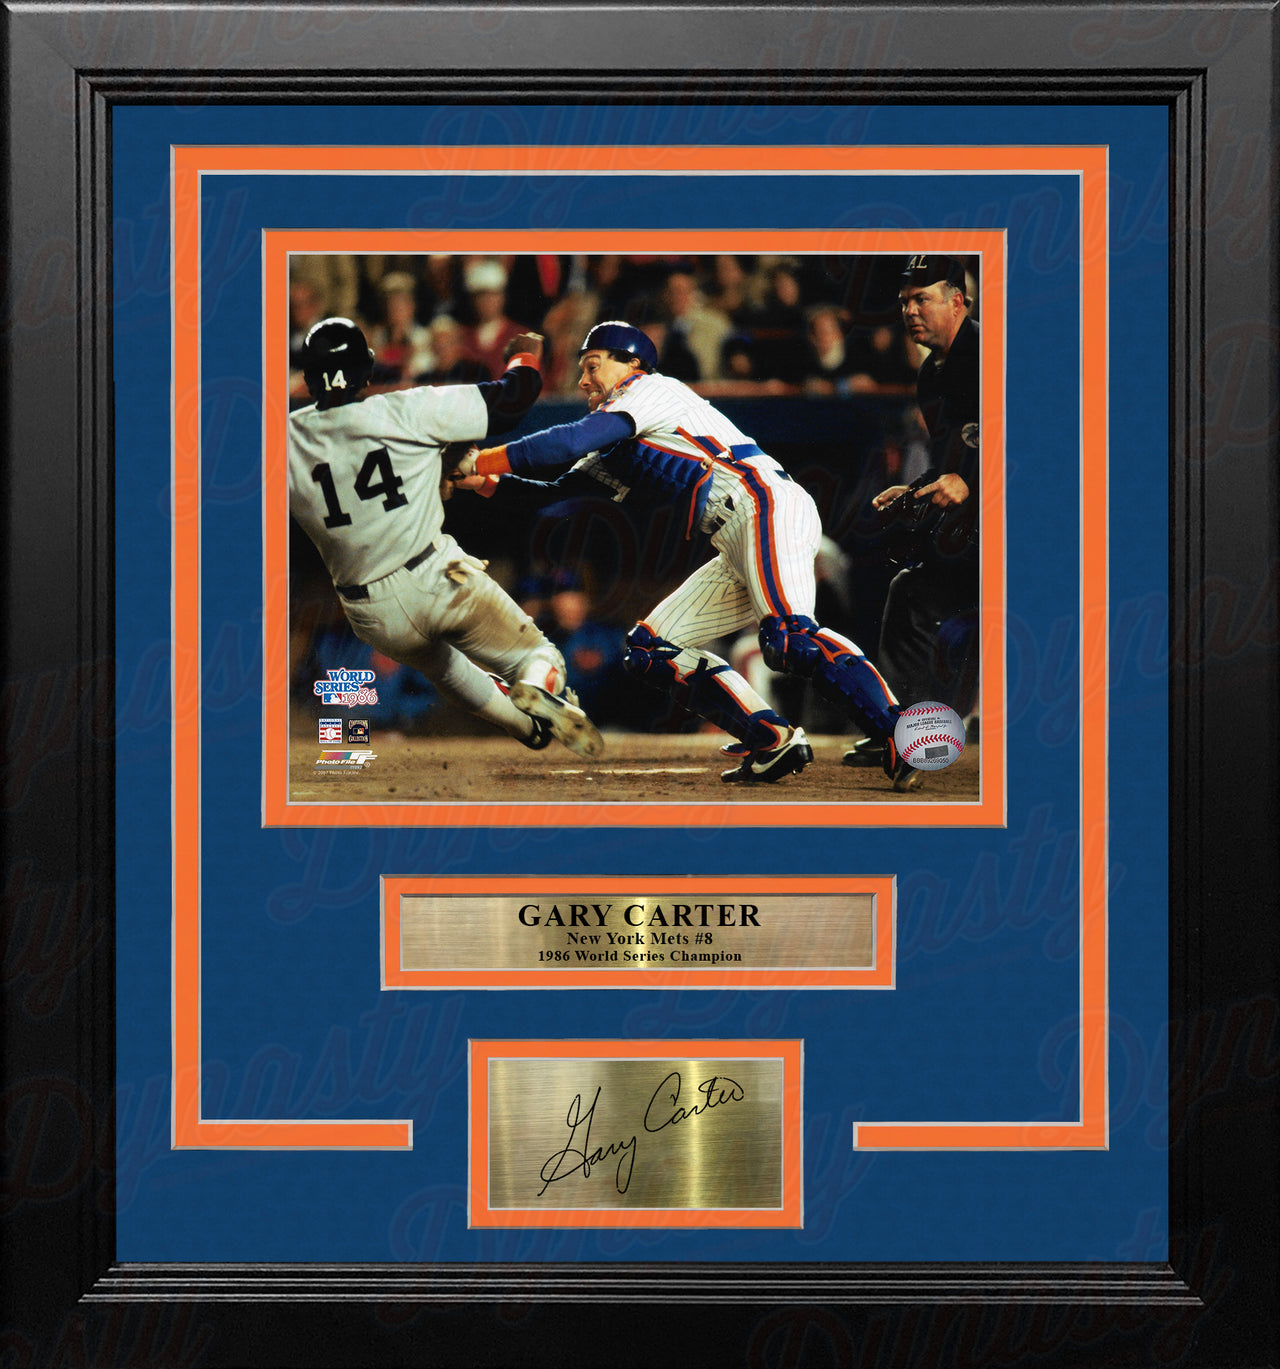 Gary Carter 1986 World Series New York Mets 8" x 10" Framed Baseball Photo with Engraved Autograph - Dynasty Sports & Framing 